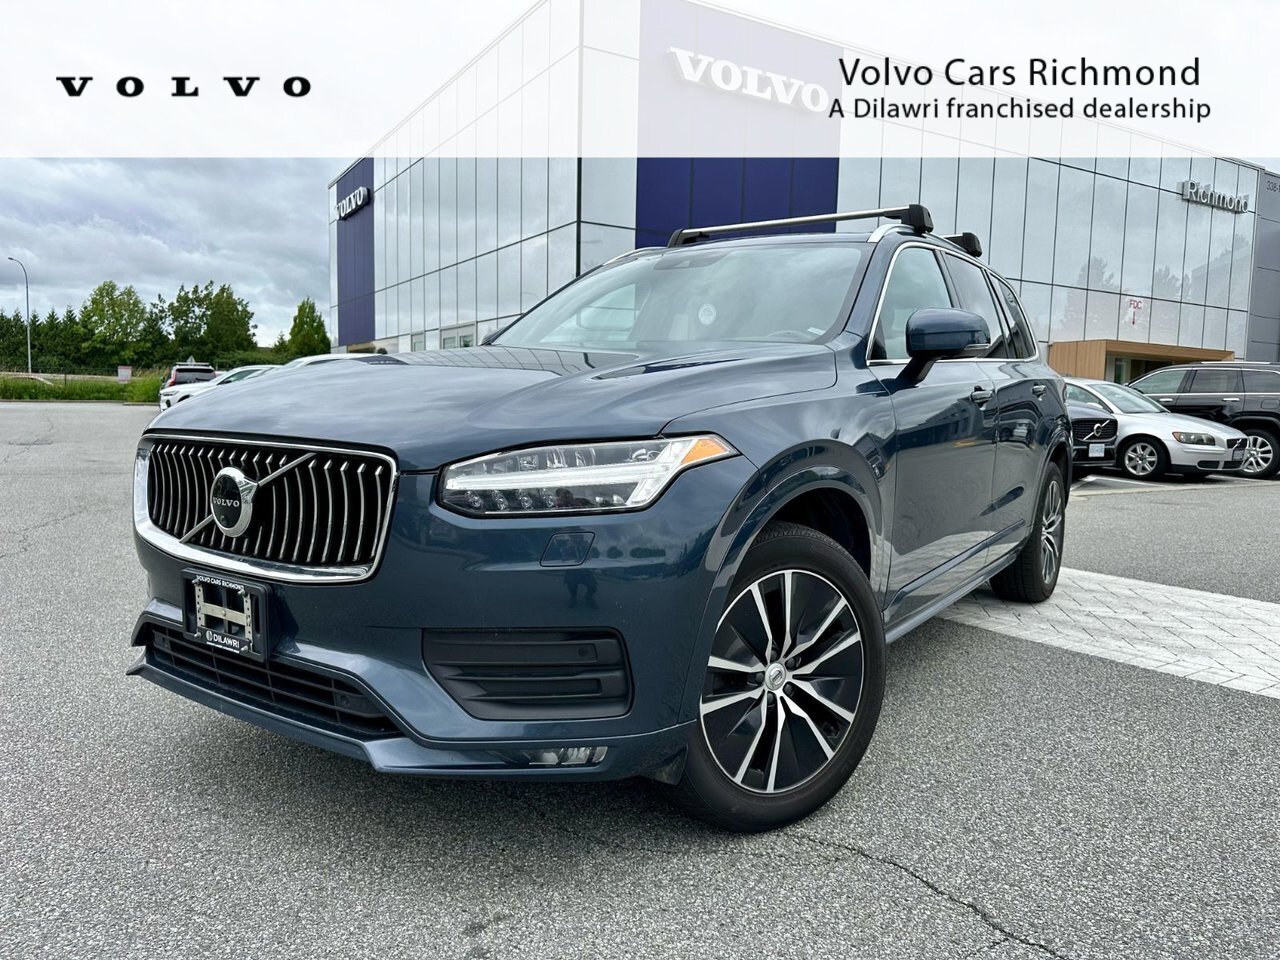 2020 Volvo XC90 T6 AWD Momentum (7-Seat) | Finance from 3.99% OAC 